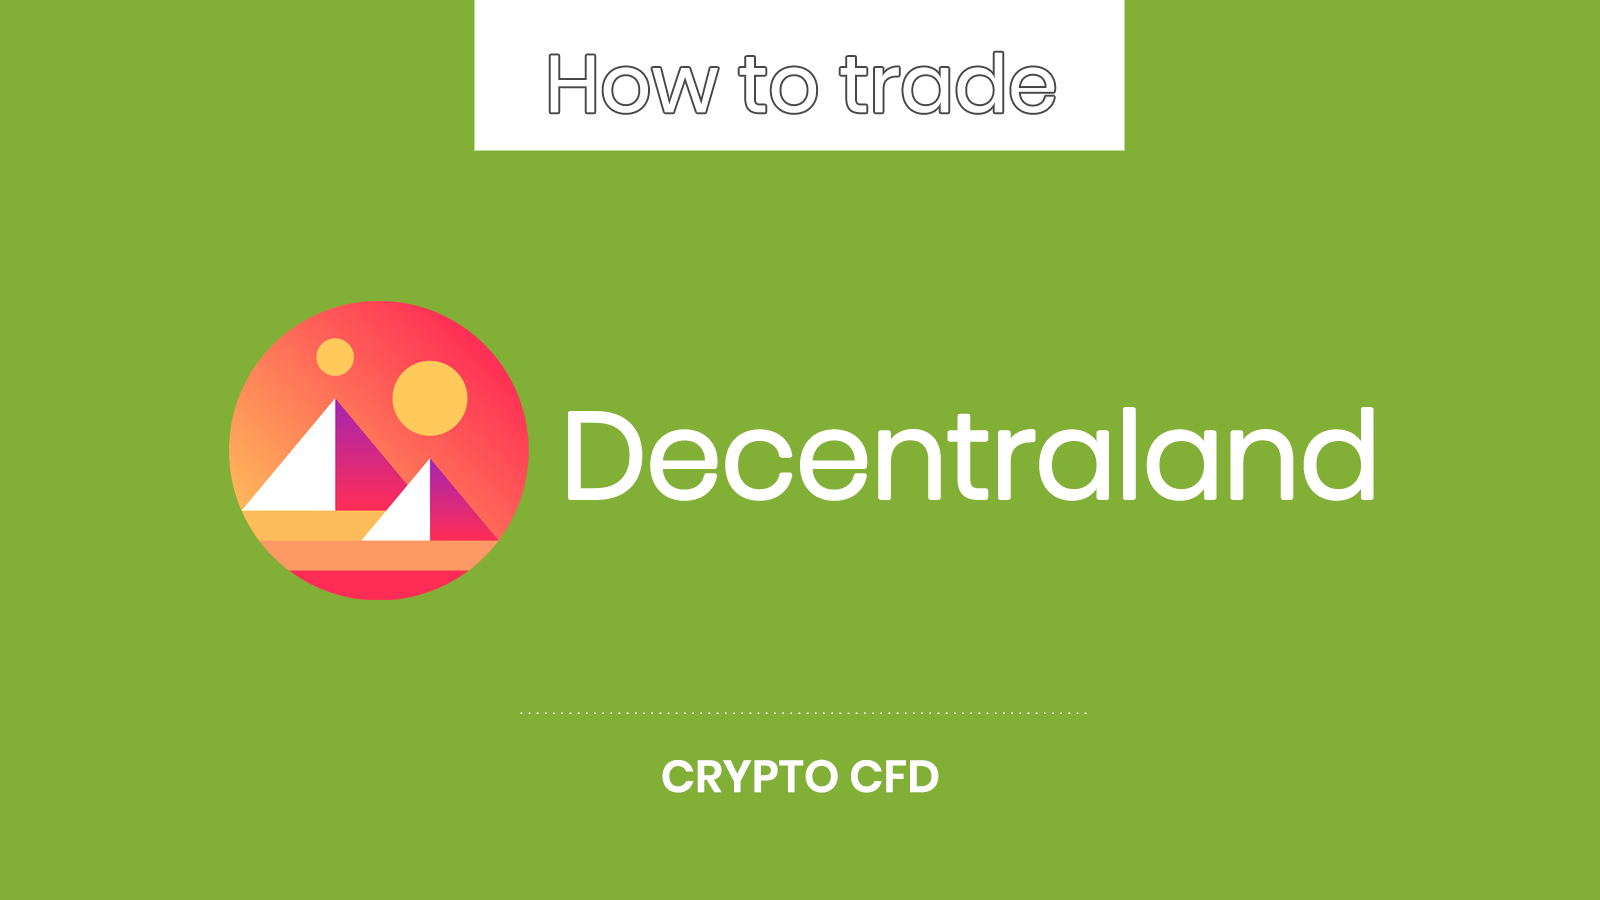 How to Trade Decentraland as a Crypto CFD on ThinkMarkets